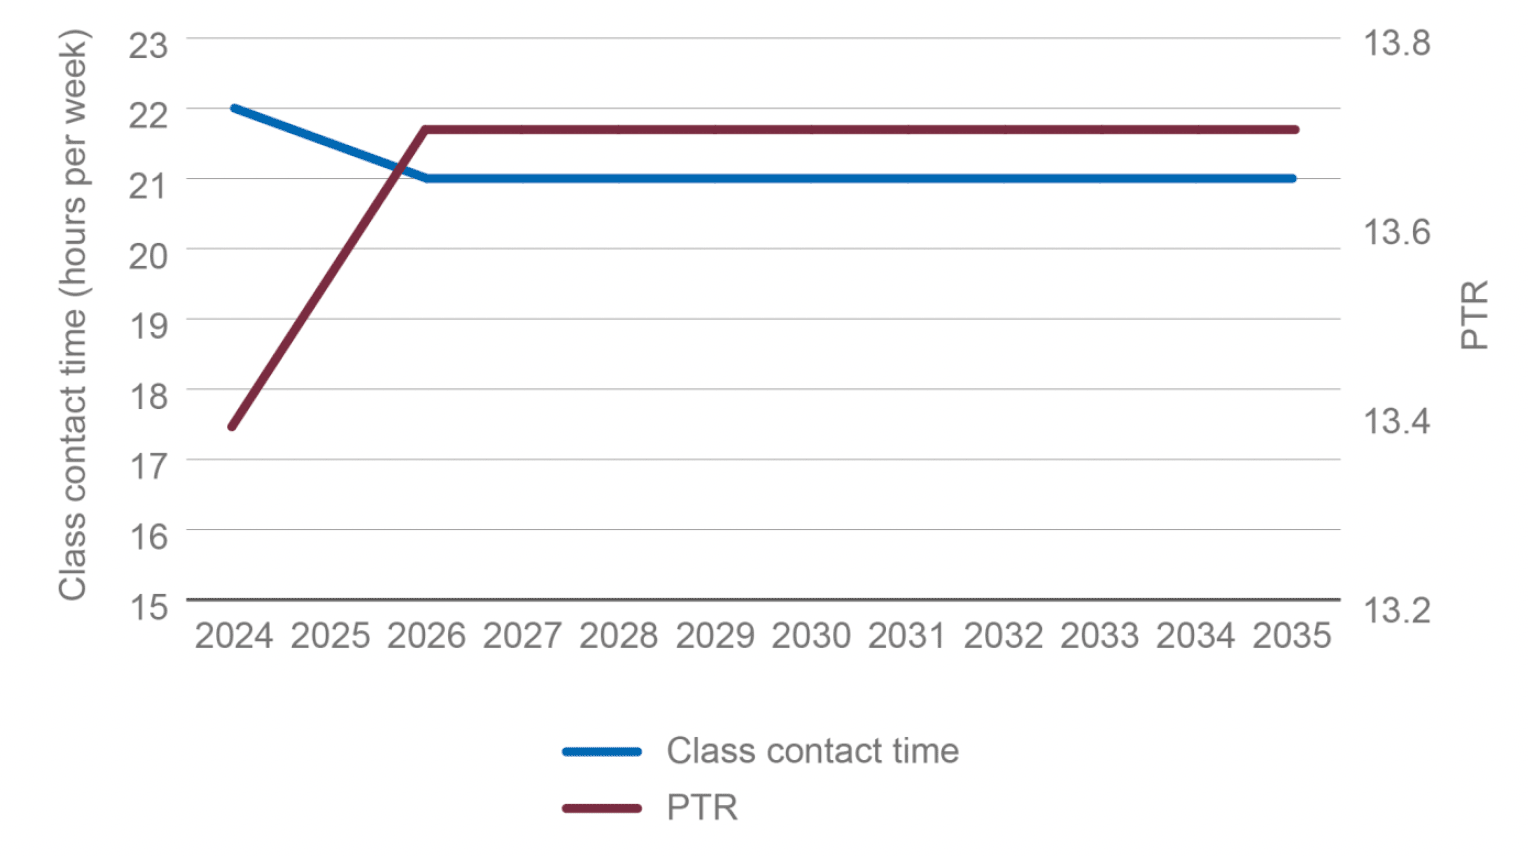 Line chart showing how a reduction in class contact time could still be achieved by 2026 in the context of an increasing PTR, if teachers are redeployed.